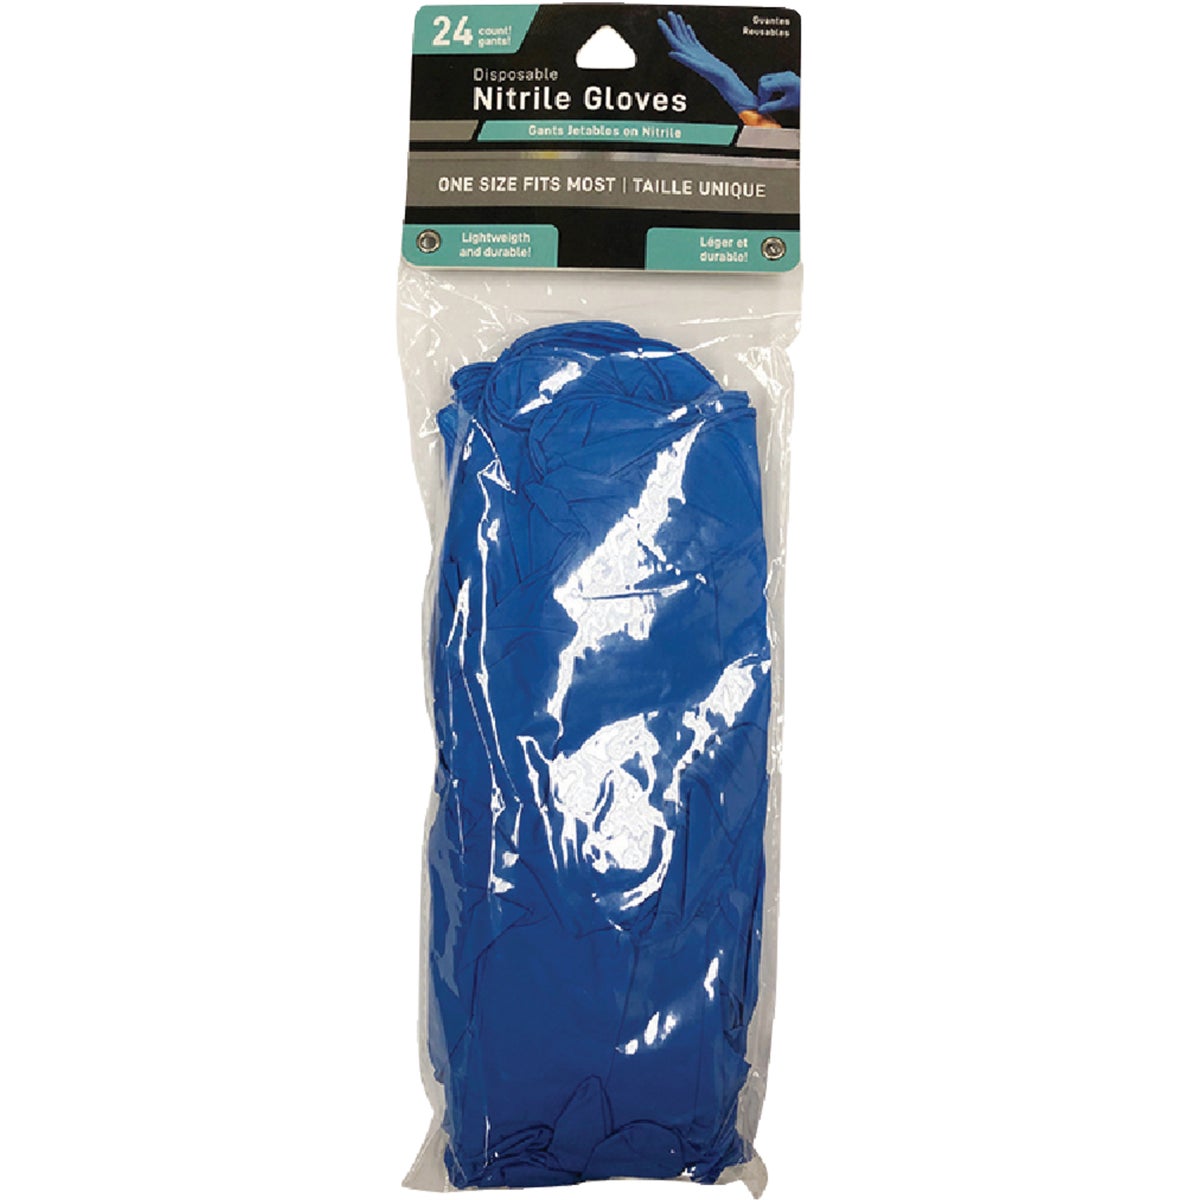 Item 987980, 24-pack disposable nitrile gloves. Ones size fits most.